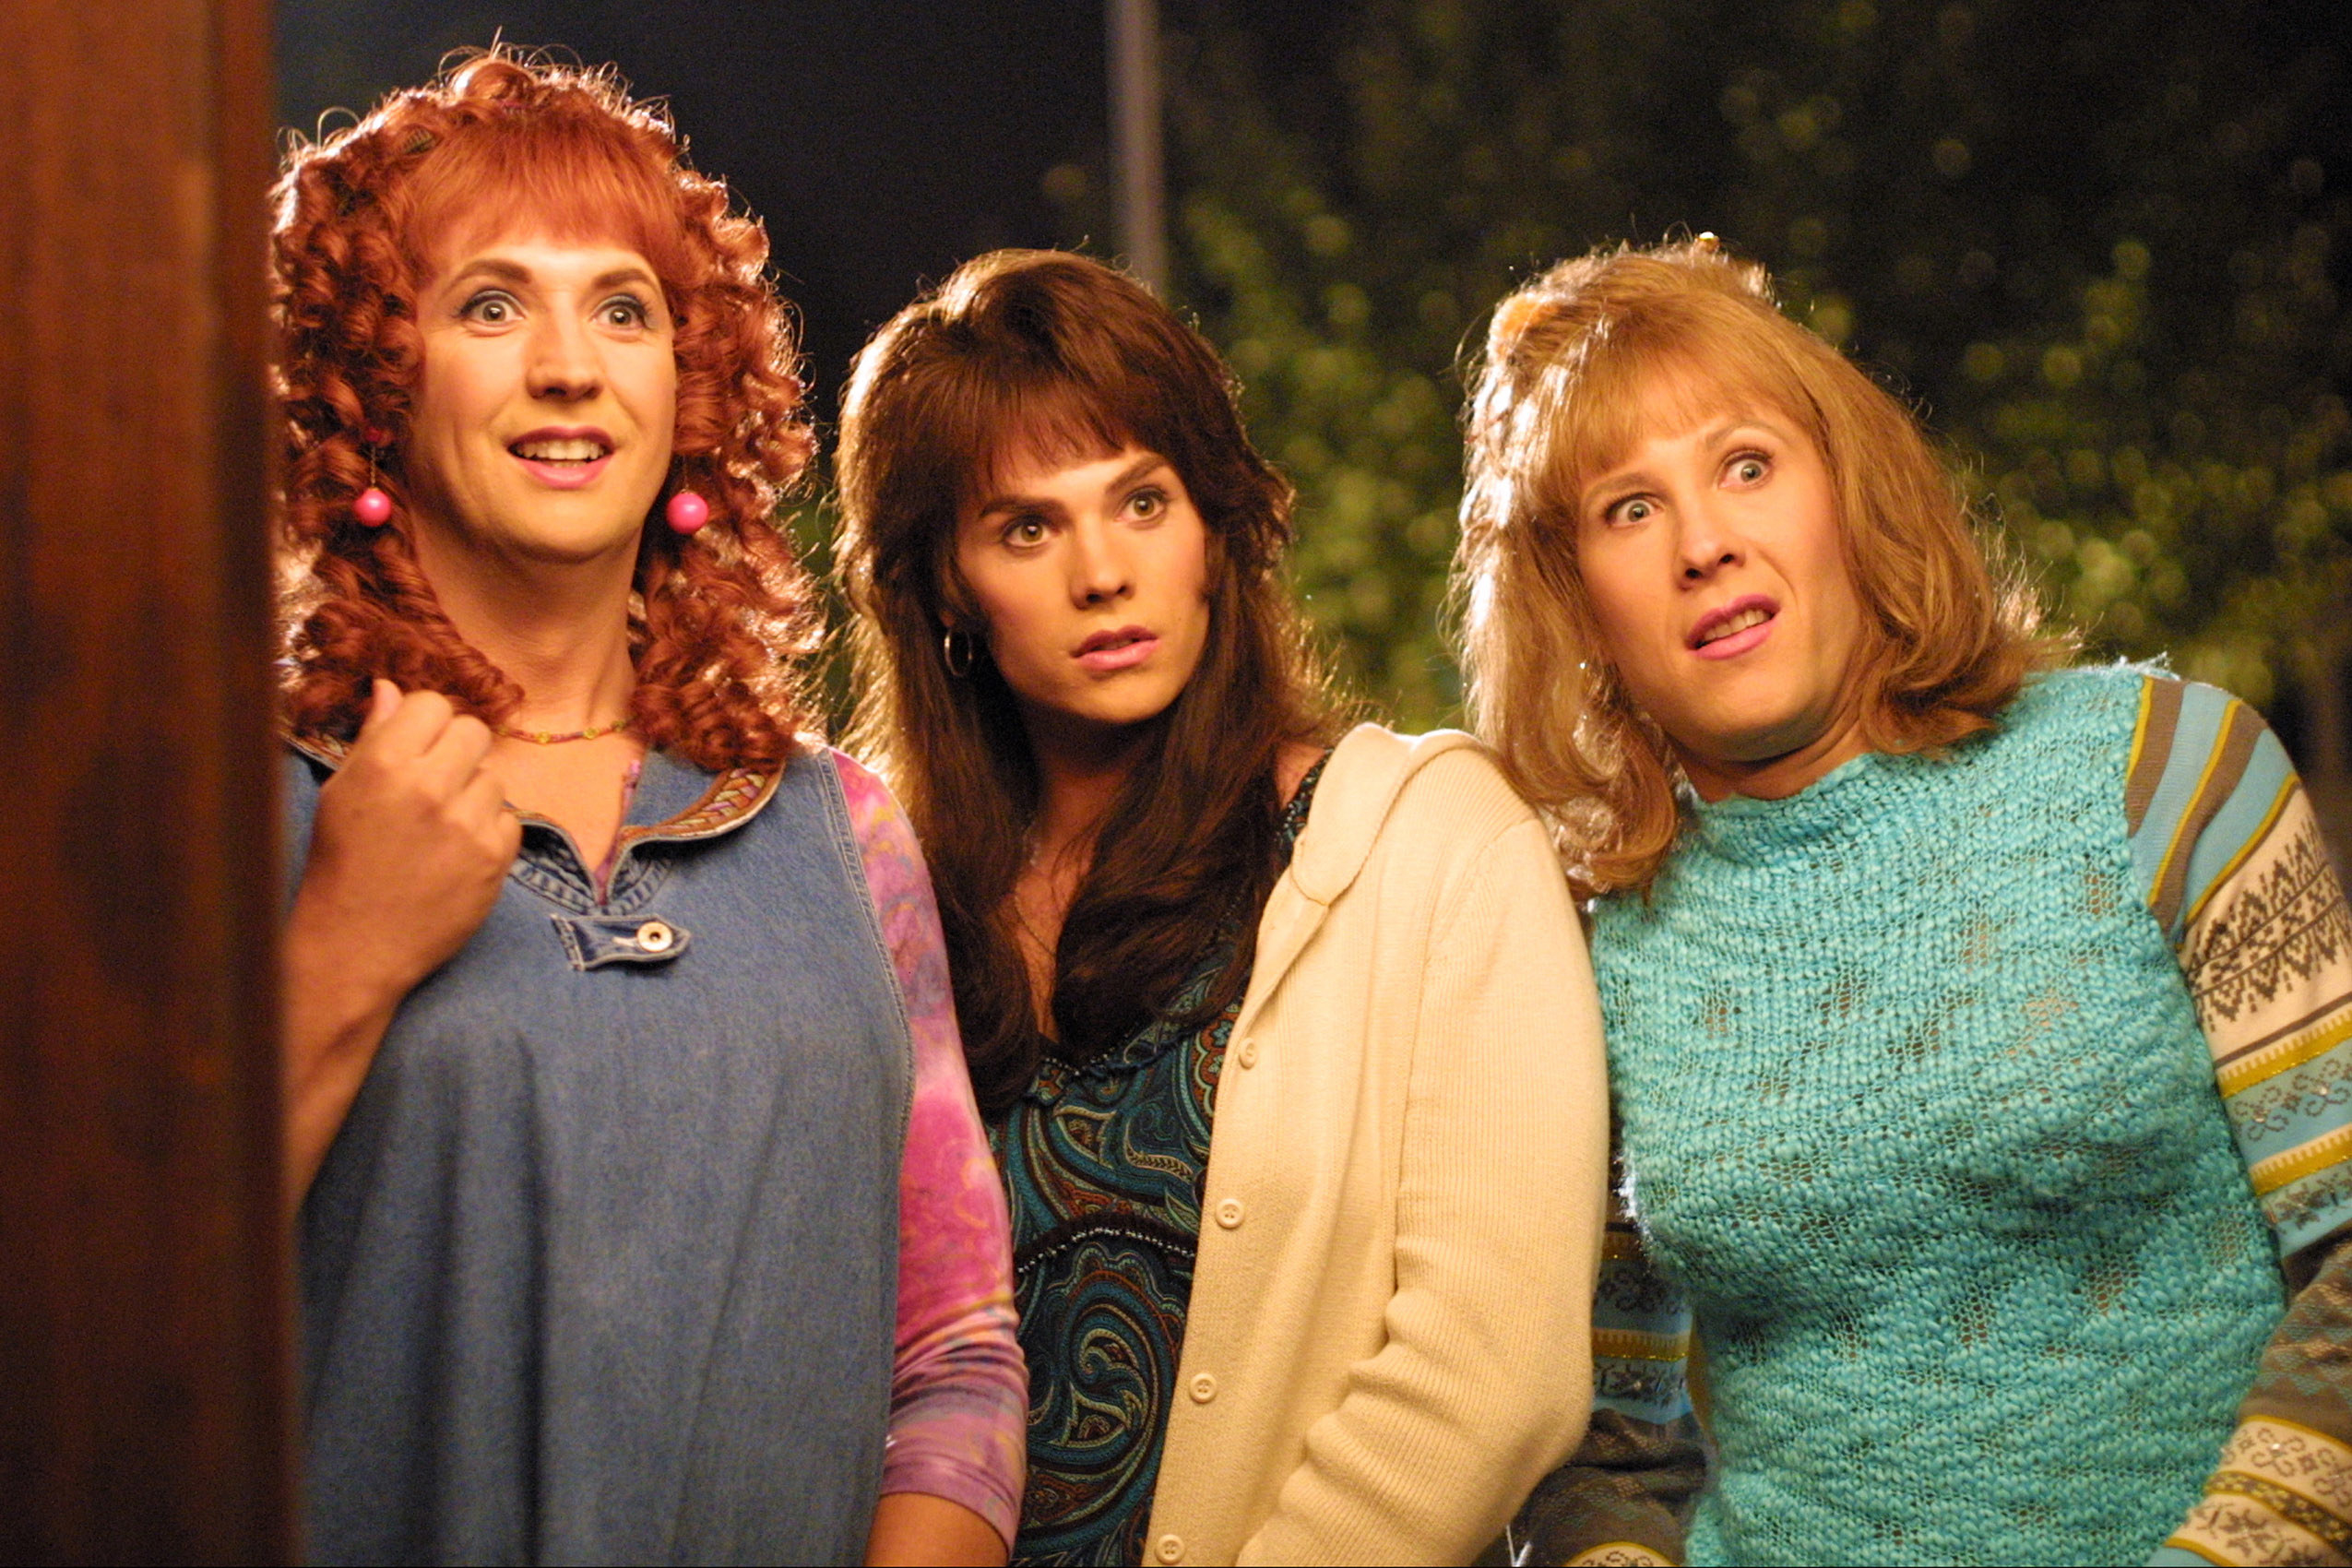 the three main characters dressed as women